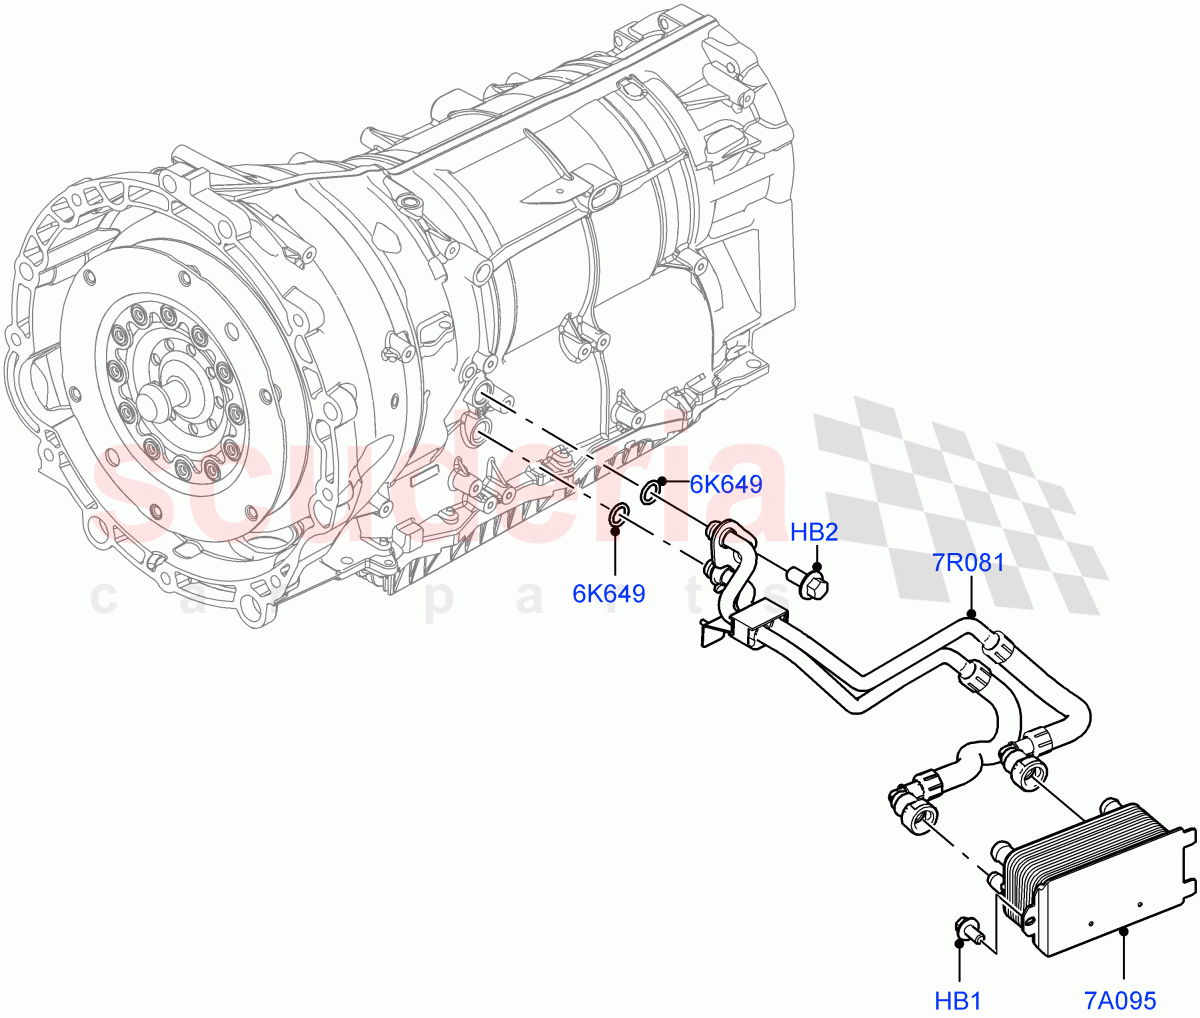 Transmission Cooling Systems(3.0L AJ20P6 Petrol High,8 Speed Auto Trans ZF 8HP76,3.0L AJ20D6 Diesel High)((V)FROMKA000001) of Land Rover Land Rover Range Rover (2012-2021) [3.0 I6 Turbo Petrol AJ20P6]